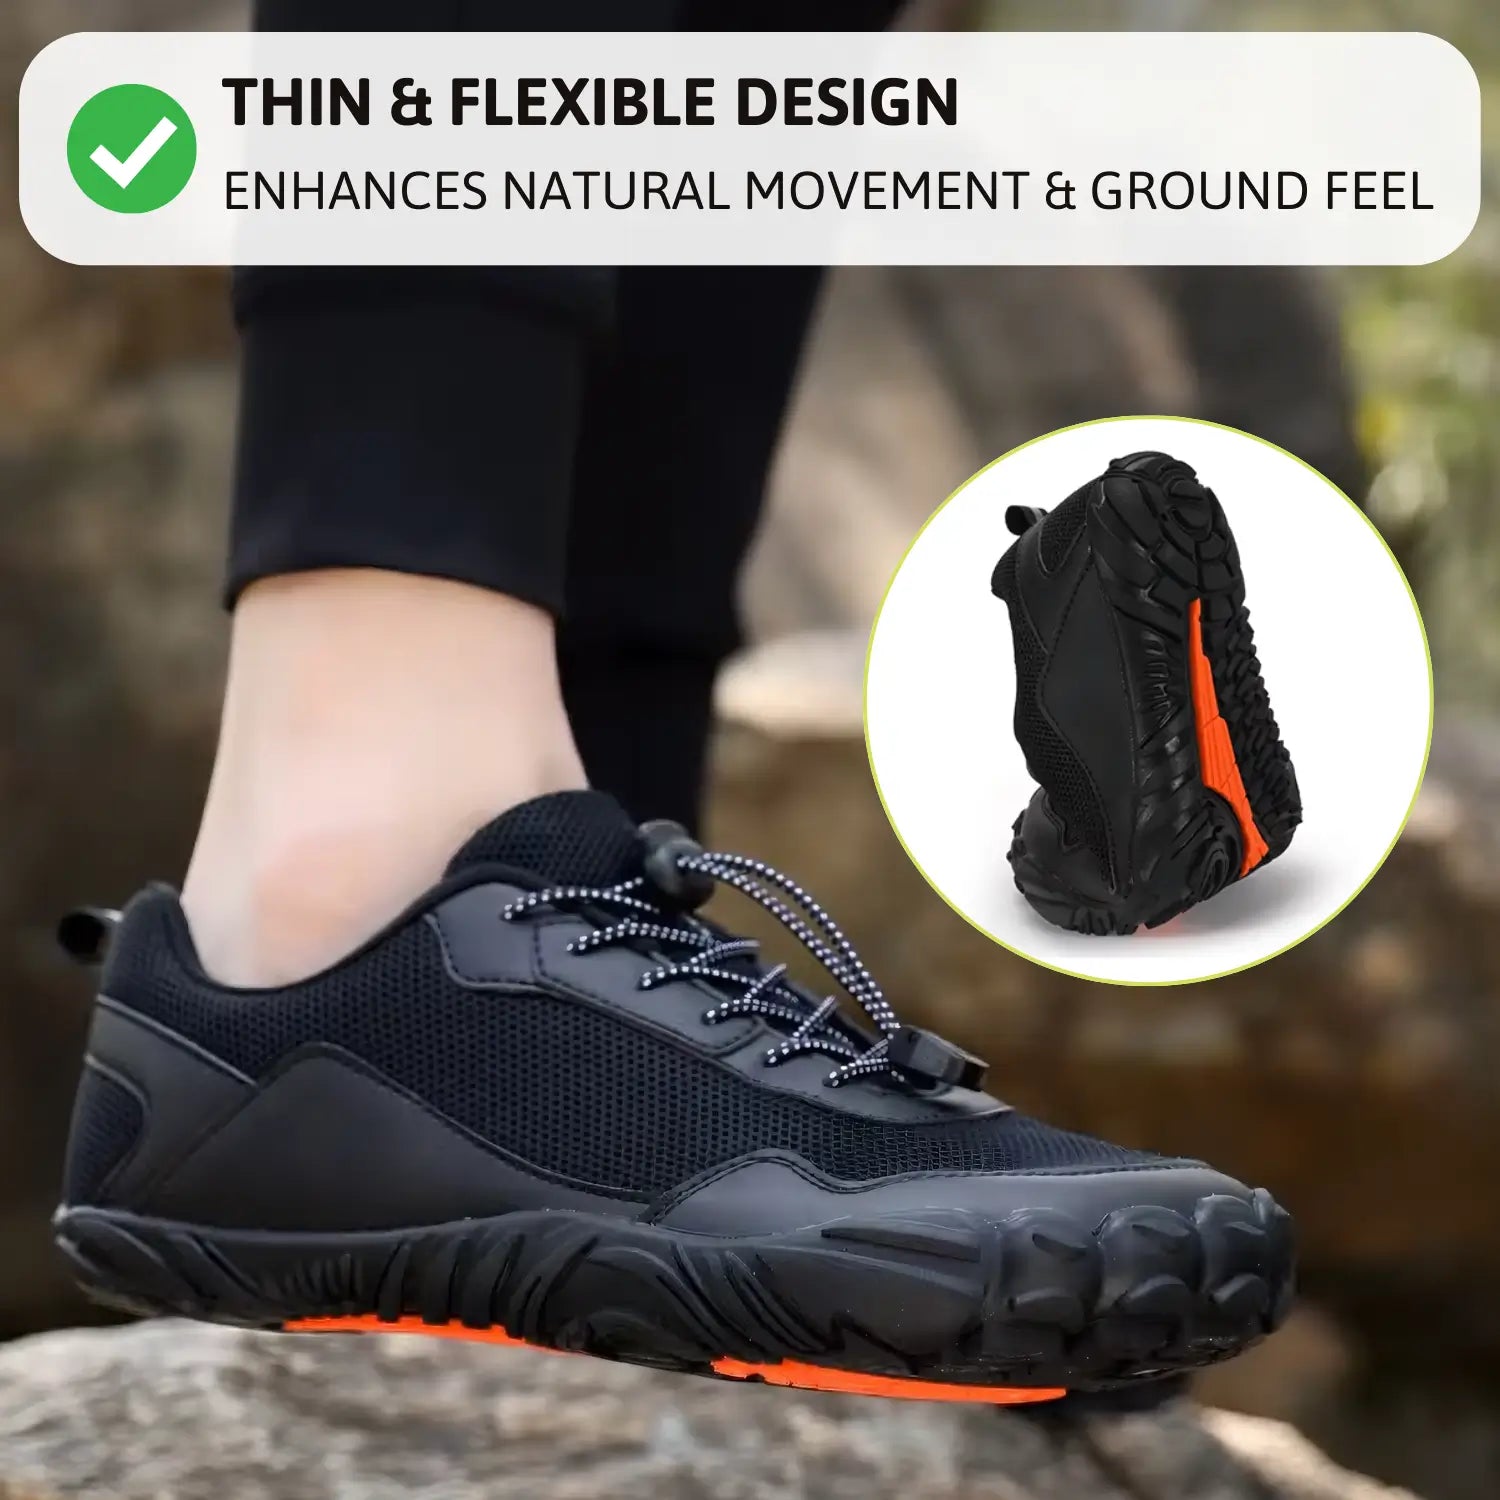 Hike - Outdoor Spring Barefoot Shoes (Unisex) (1+1 FREE)